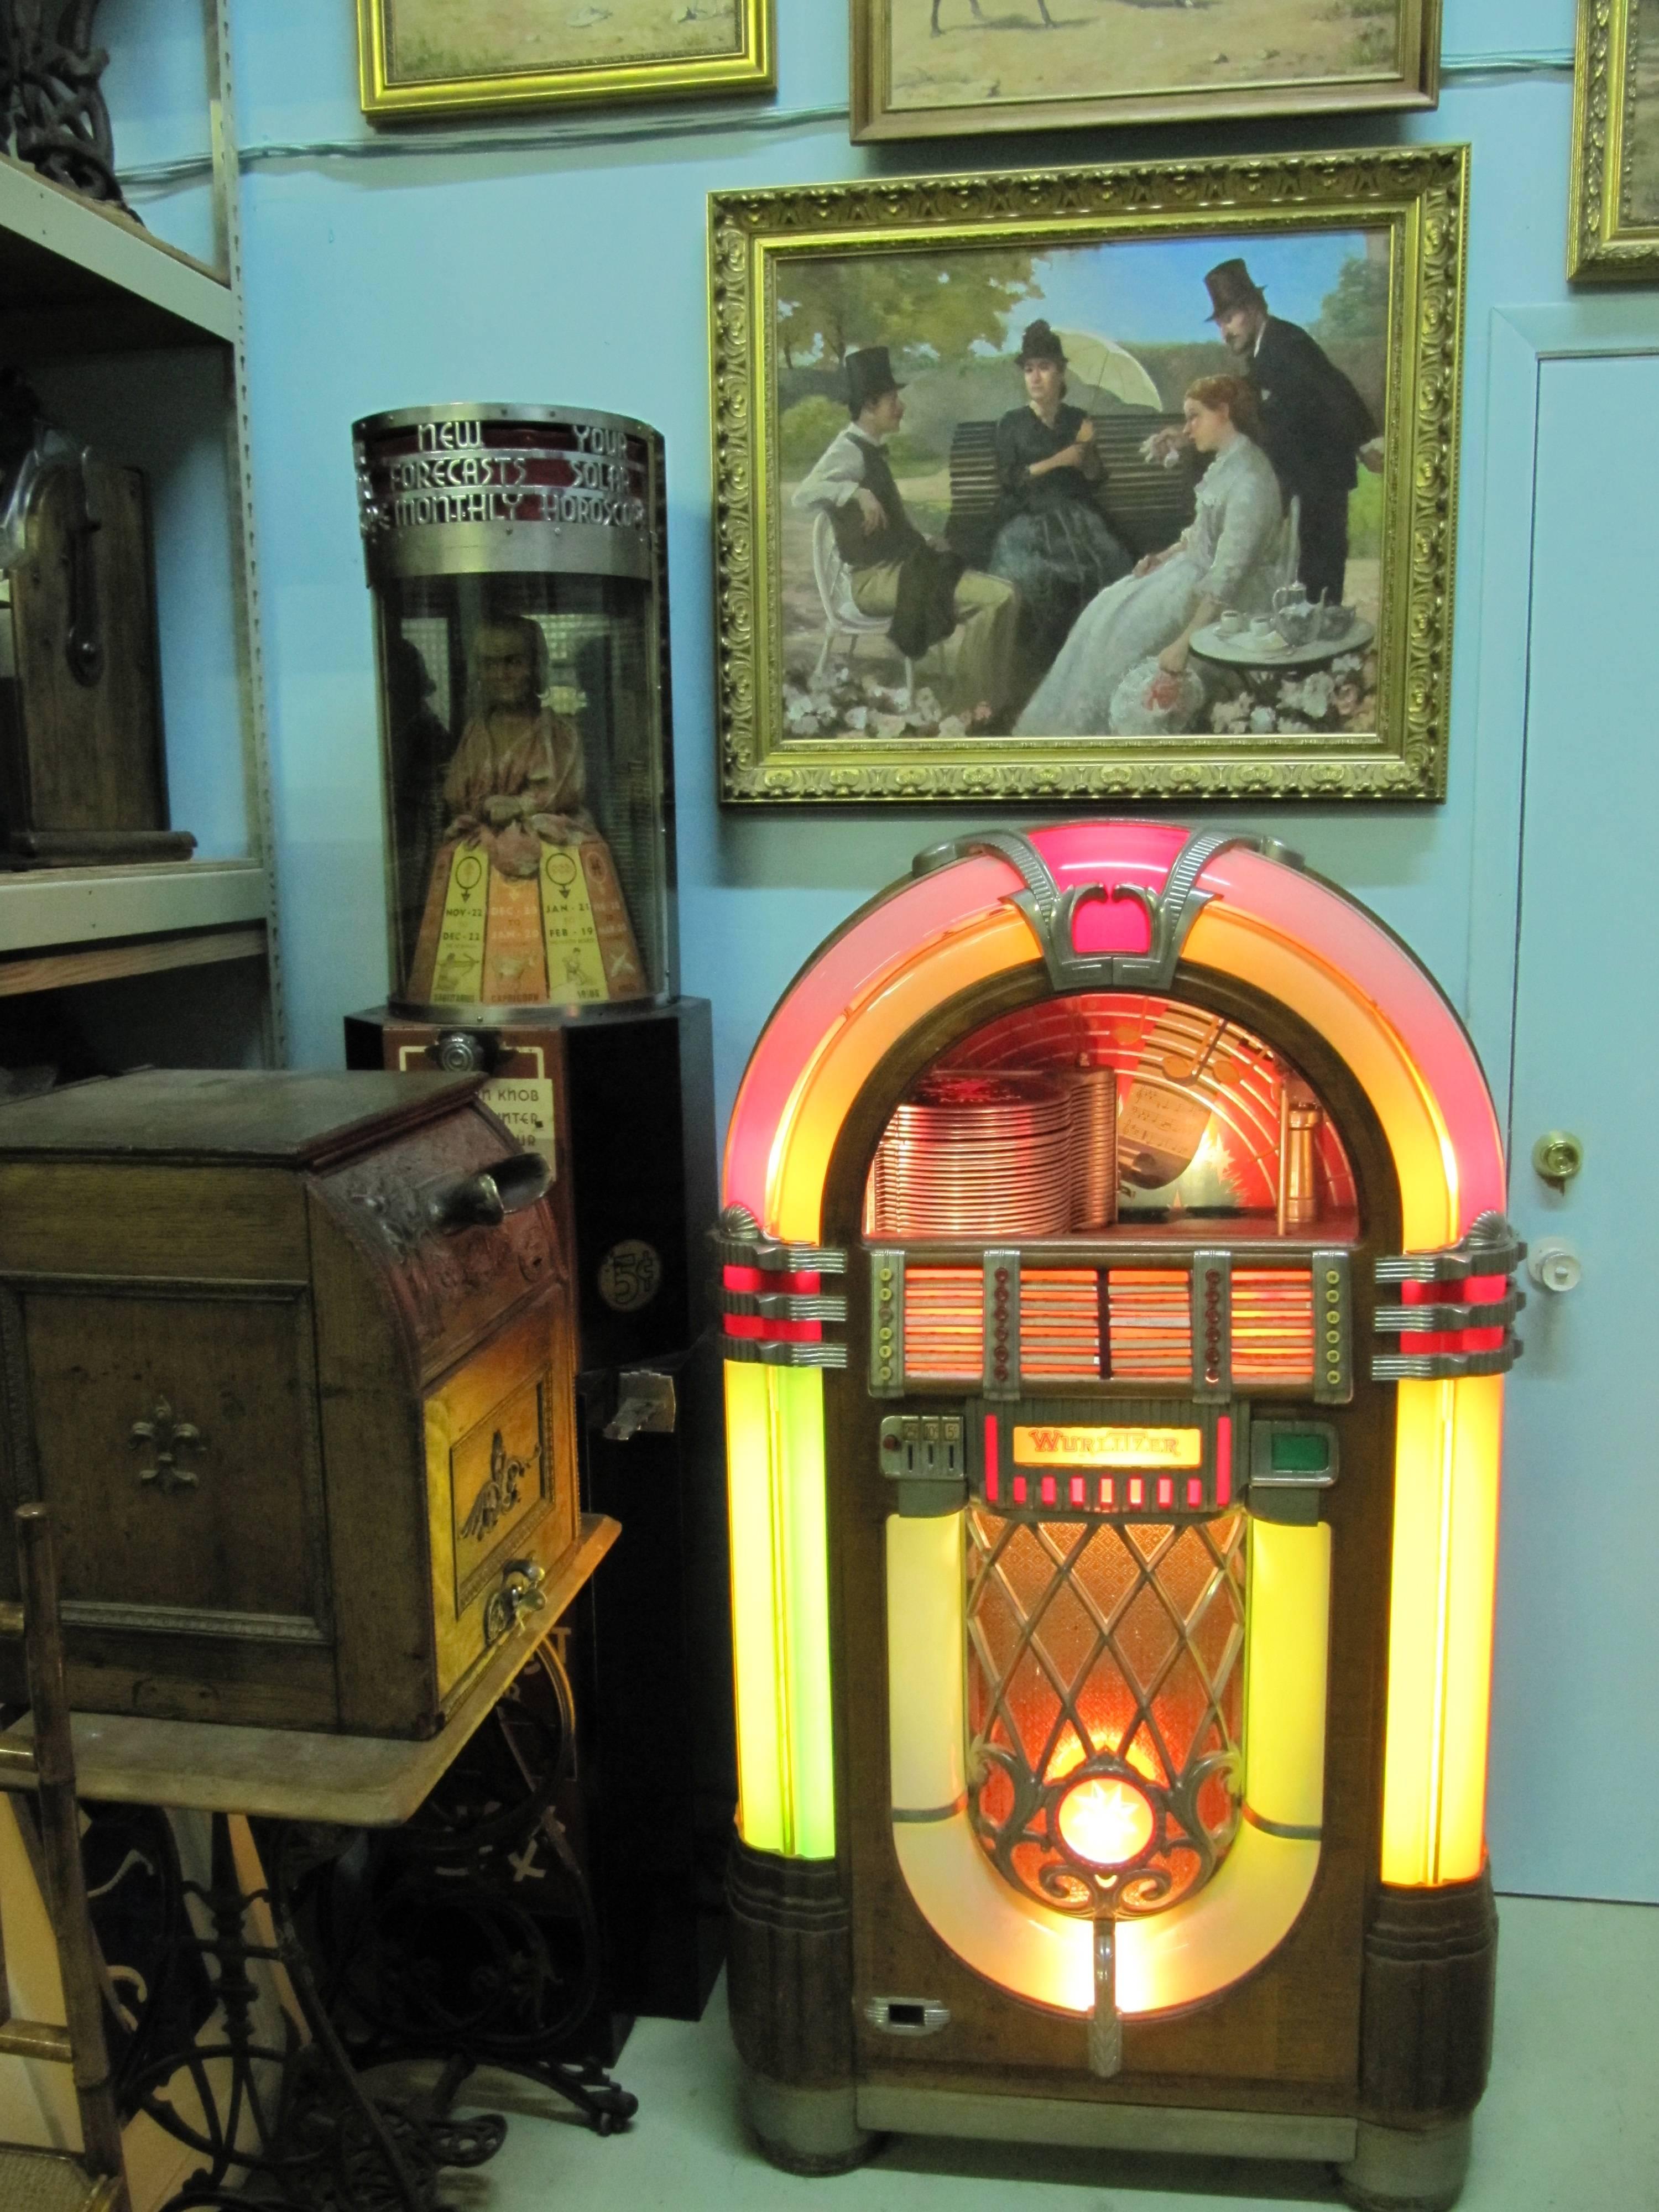 Cool jukebox made to impress!!
The case in nice original condition-mechanism has been reconditioned, plays 78 records and has the coolest true nostalgic sound. Select from A 24 stack of 78 record set on free play or play with coins to select your